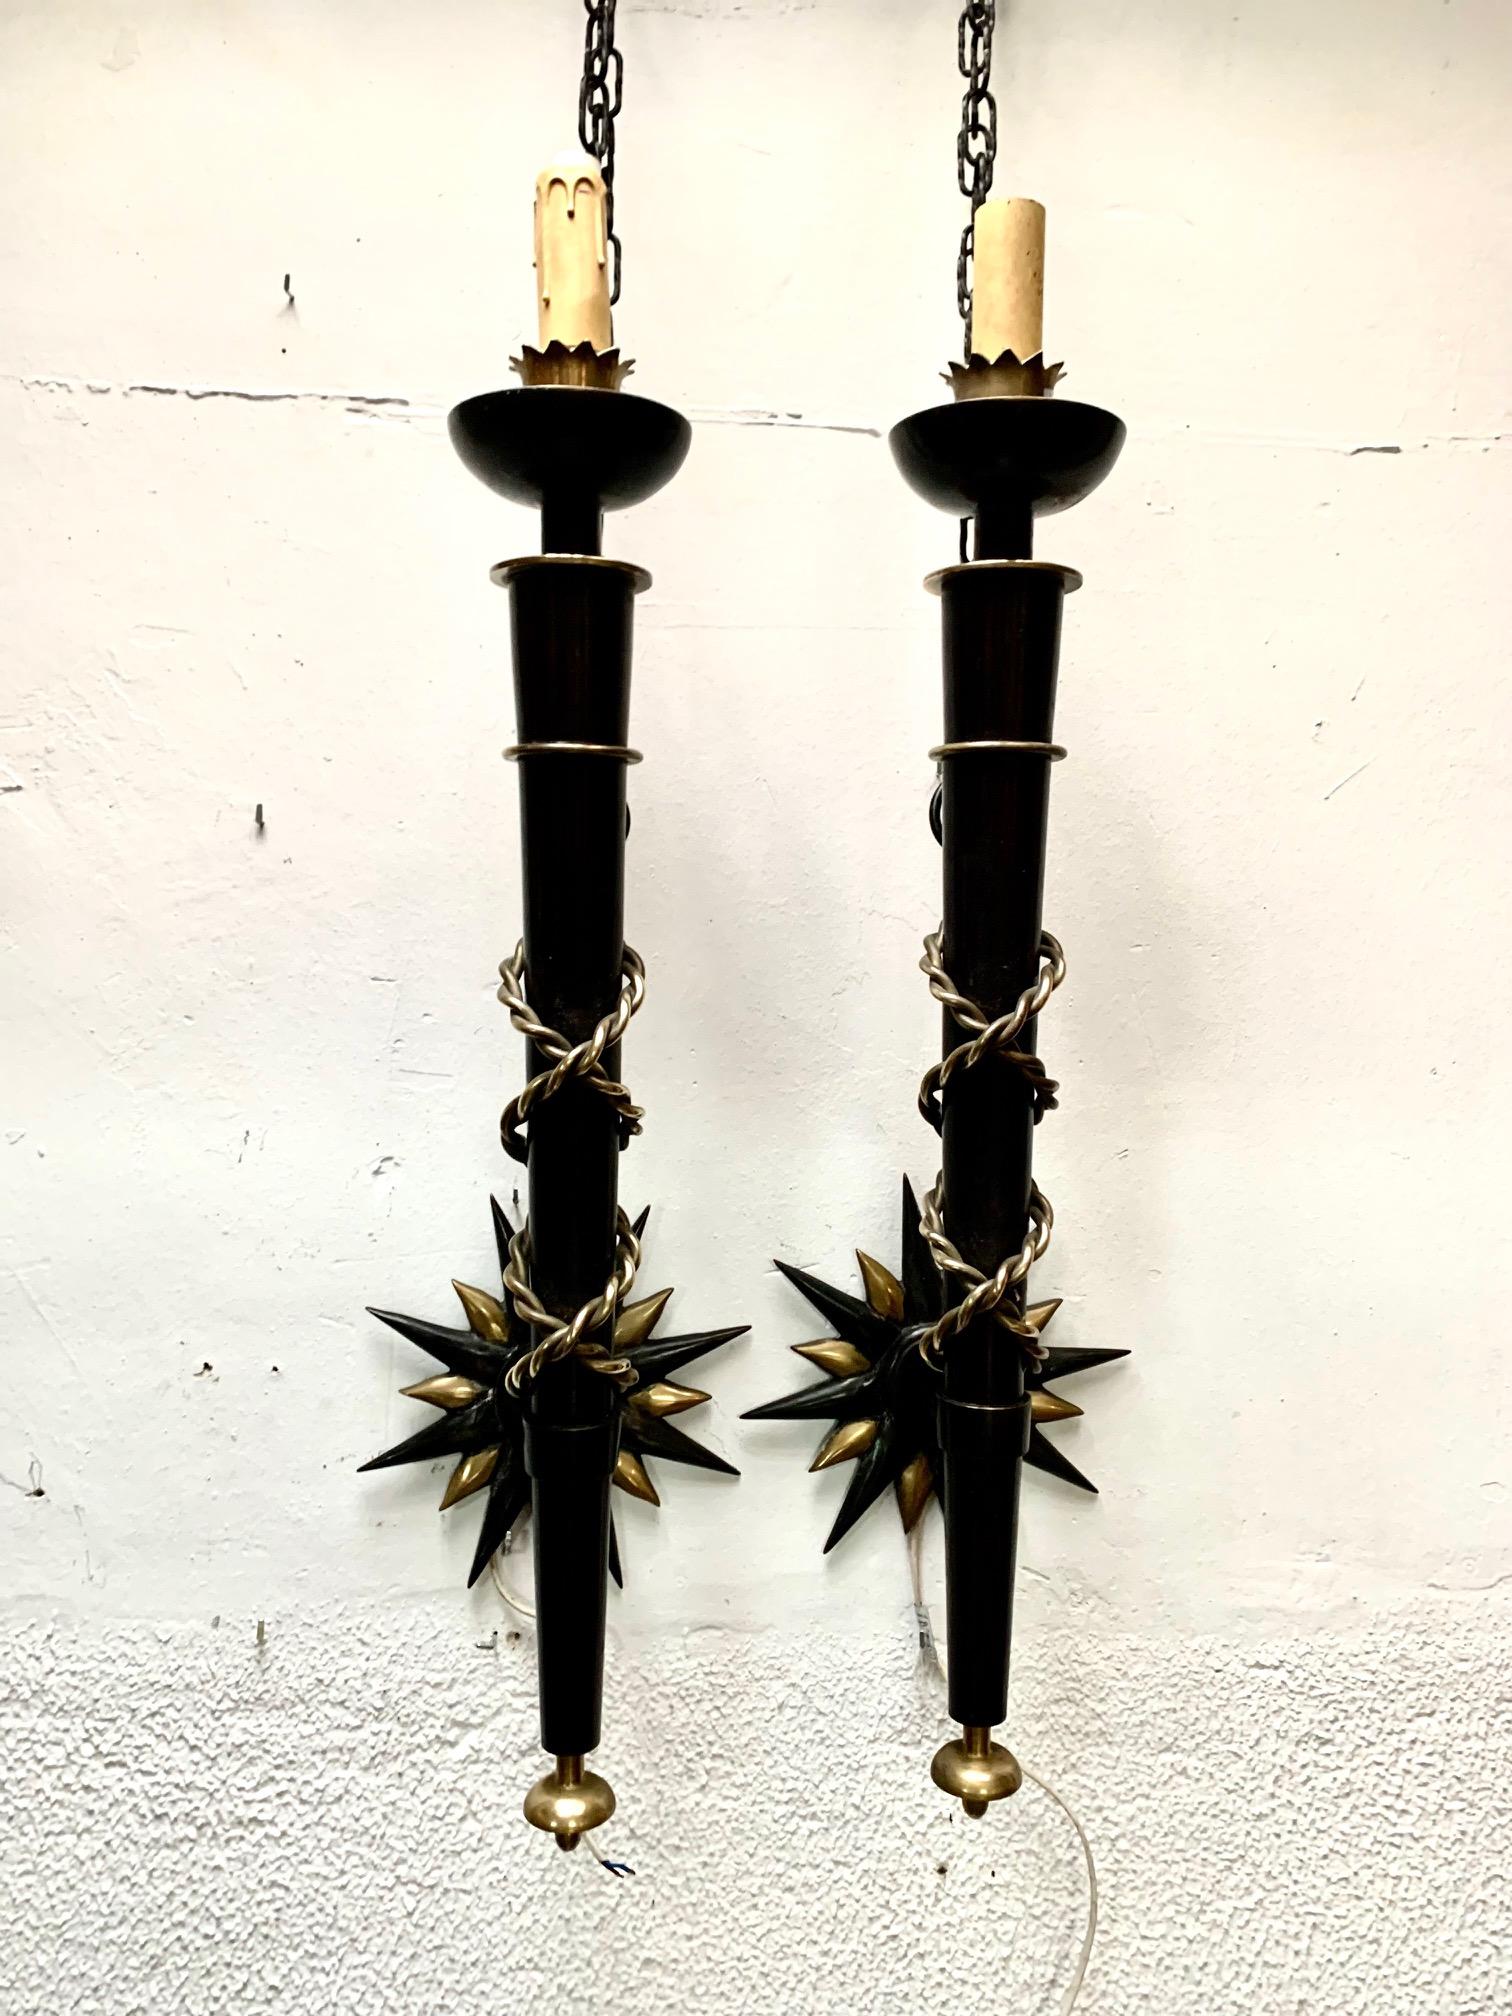 Mid-Century Modern Pair Wrought Iron and Brass Toorchere Wall Sconces 1950 Gilbert Poillerat Style For Sale